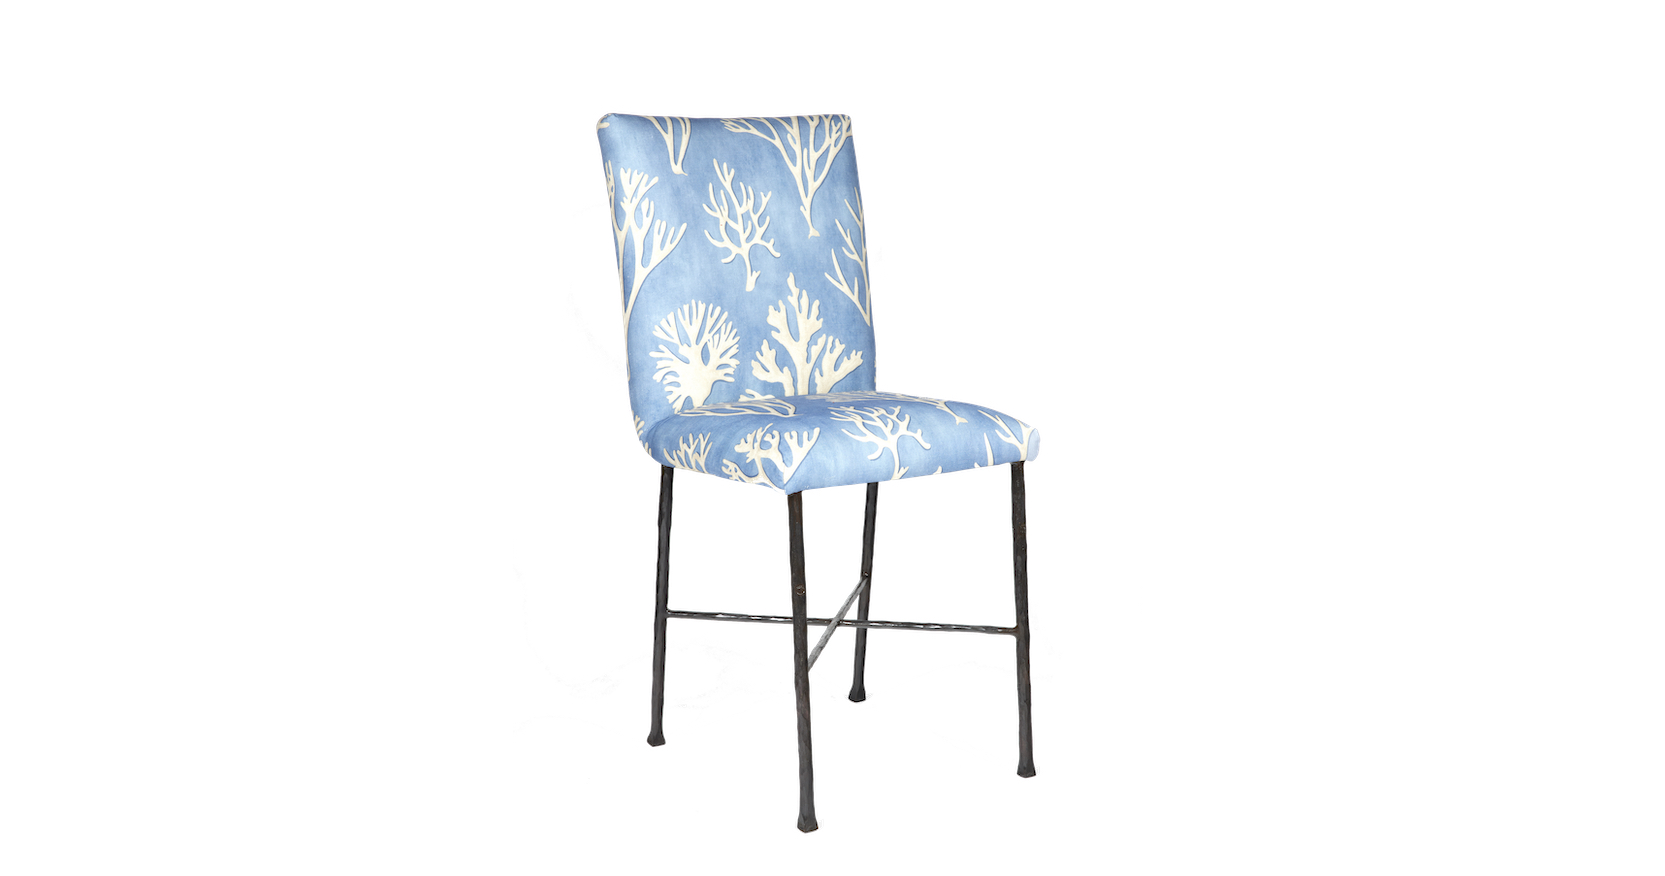 Garouste Bonetti, black wrought iron chair with back and seat upholstered in blue and white patterned fabric